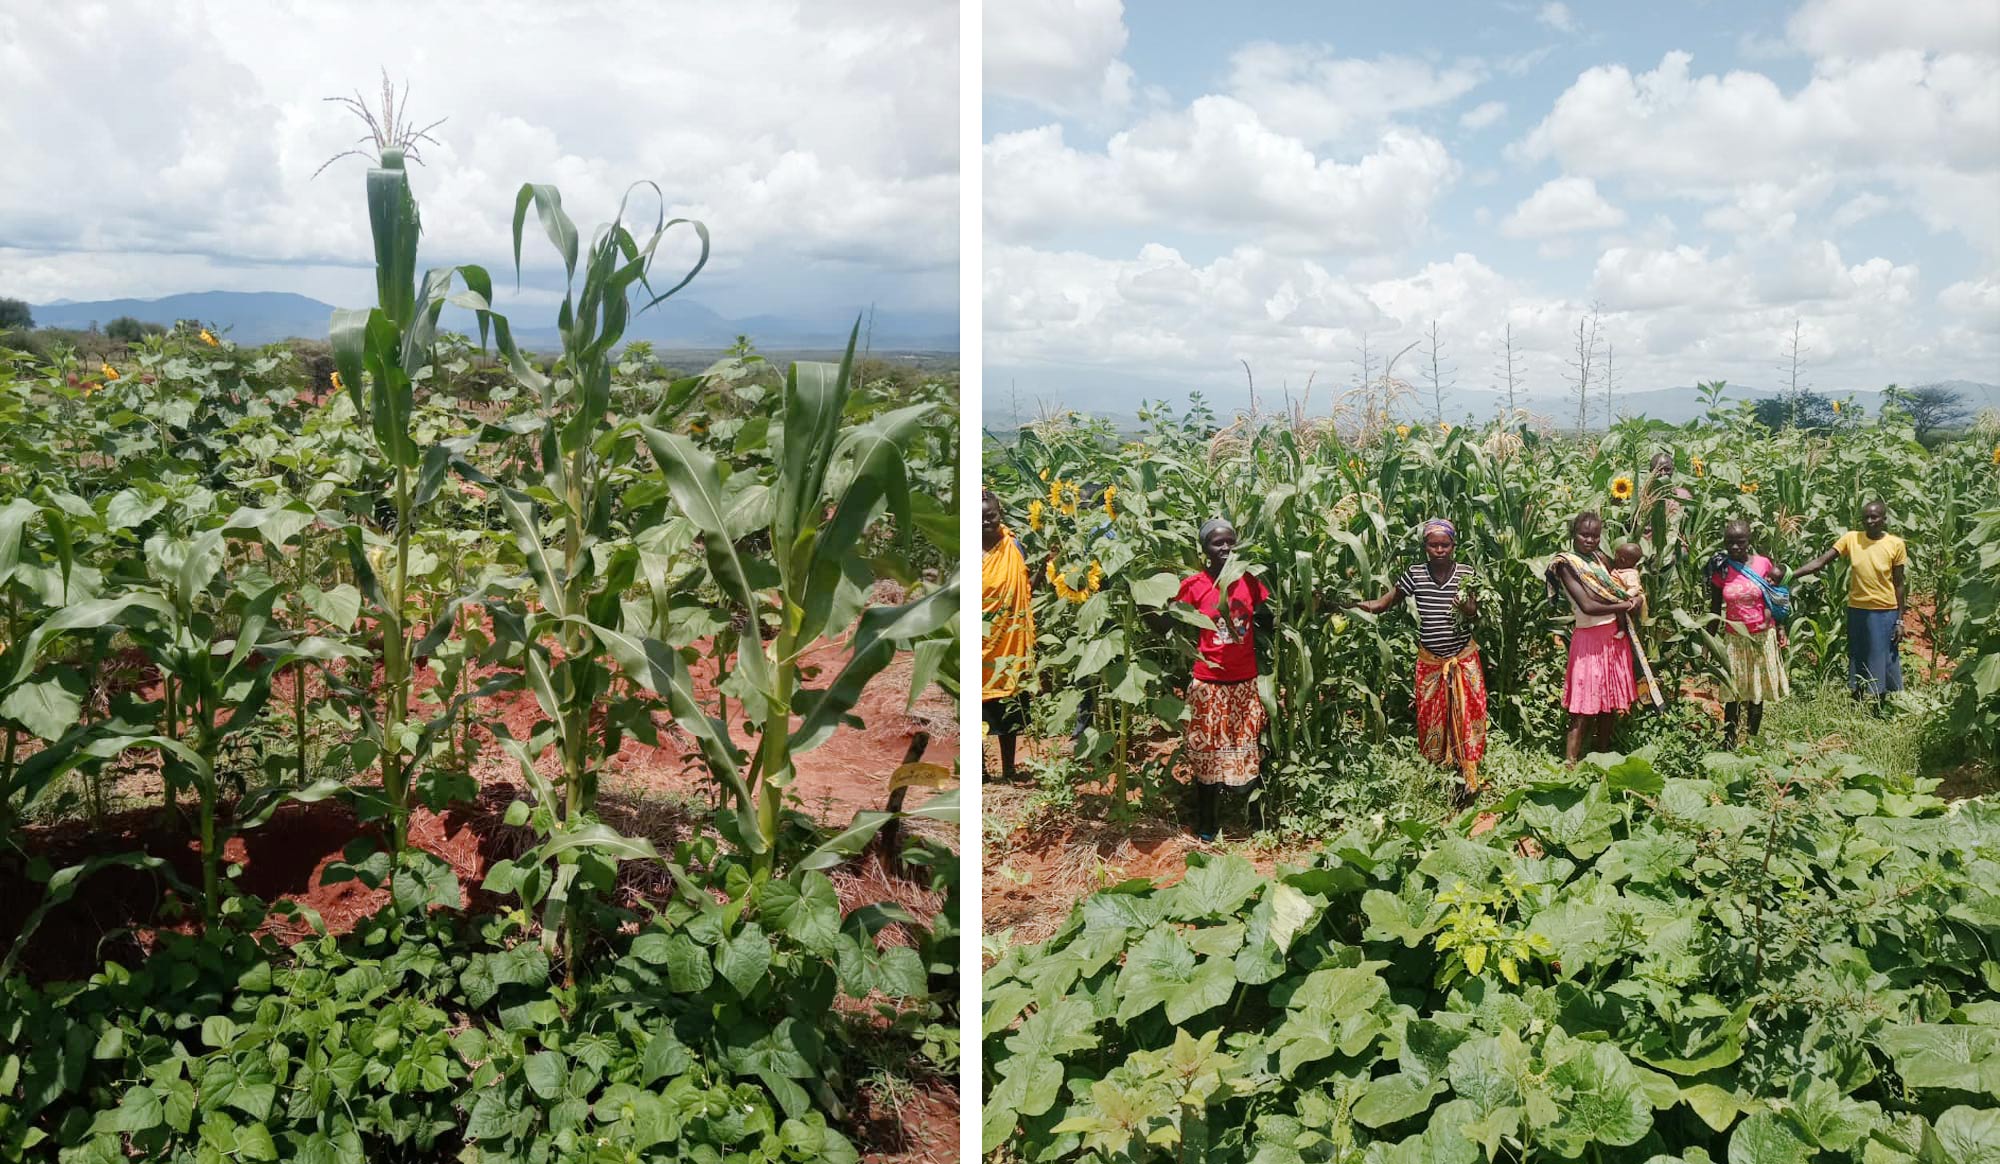 Two pictures, one is a closeup of a vegetable patch where maize and other plants are growing. The other picture shows people standing surrounded by plants. 